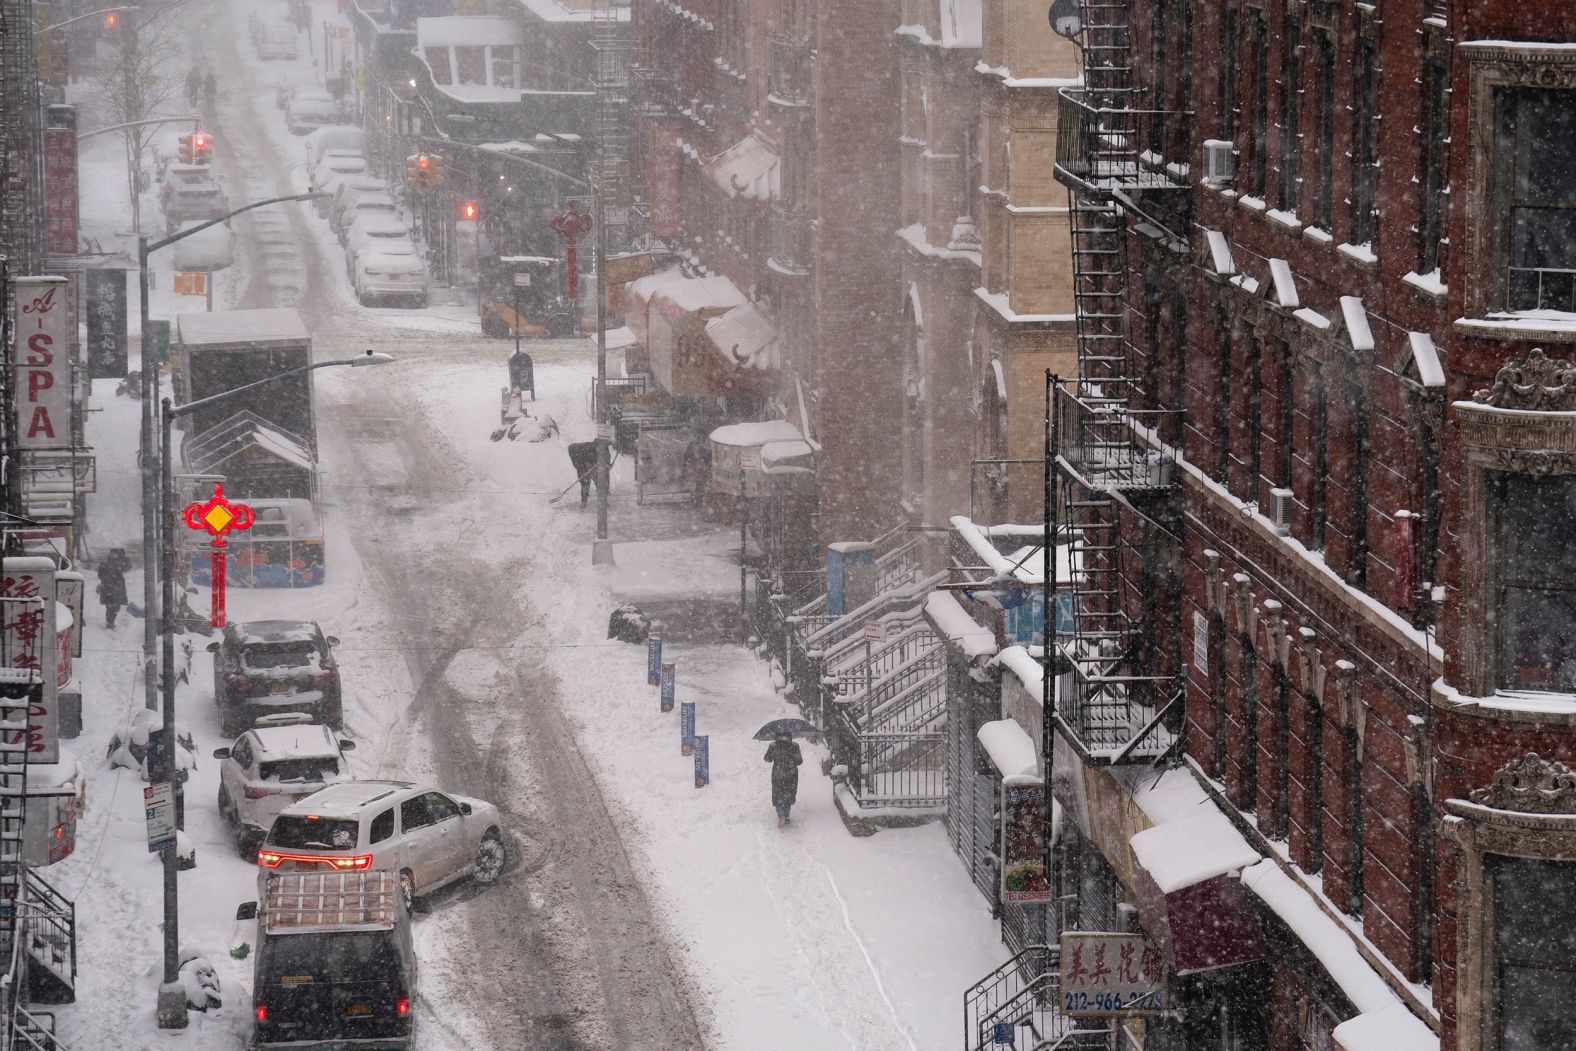 A pedestrian walks down a snow-covered sidewalk in the Chinatown neighborhood of New York on Monday.